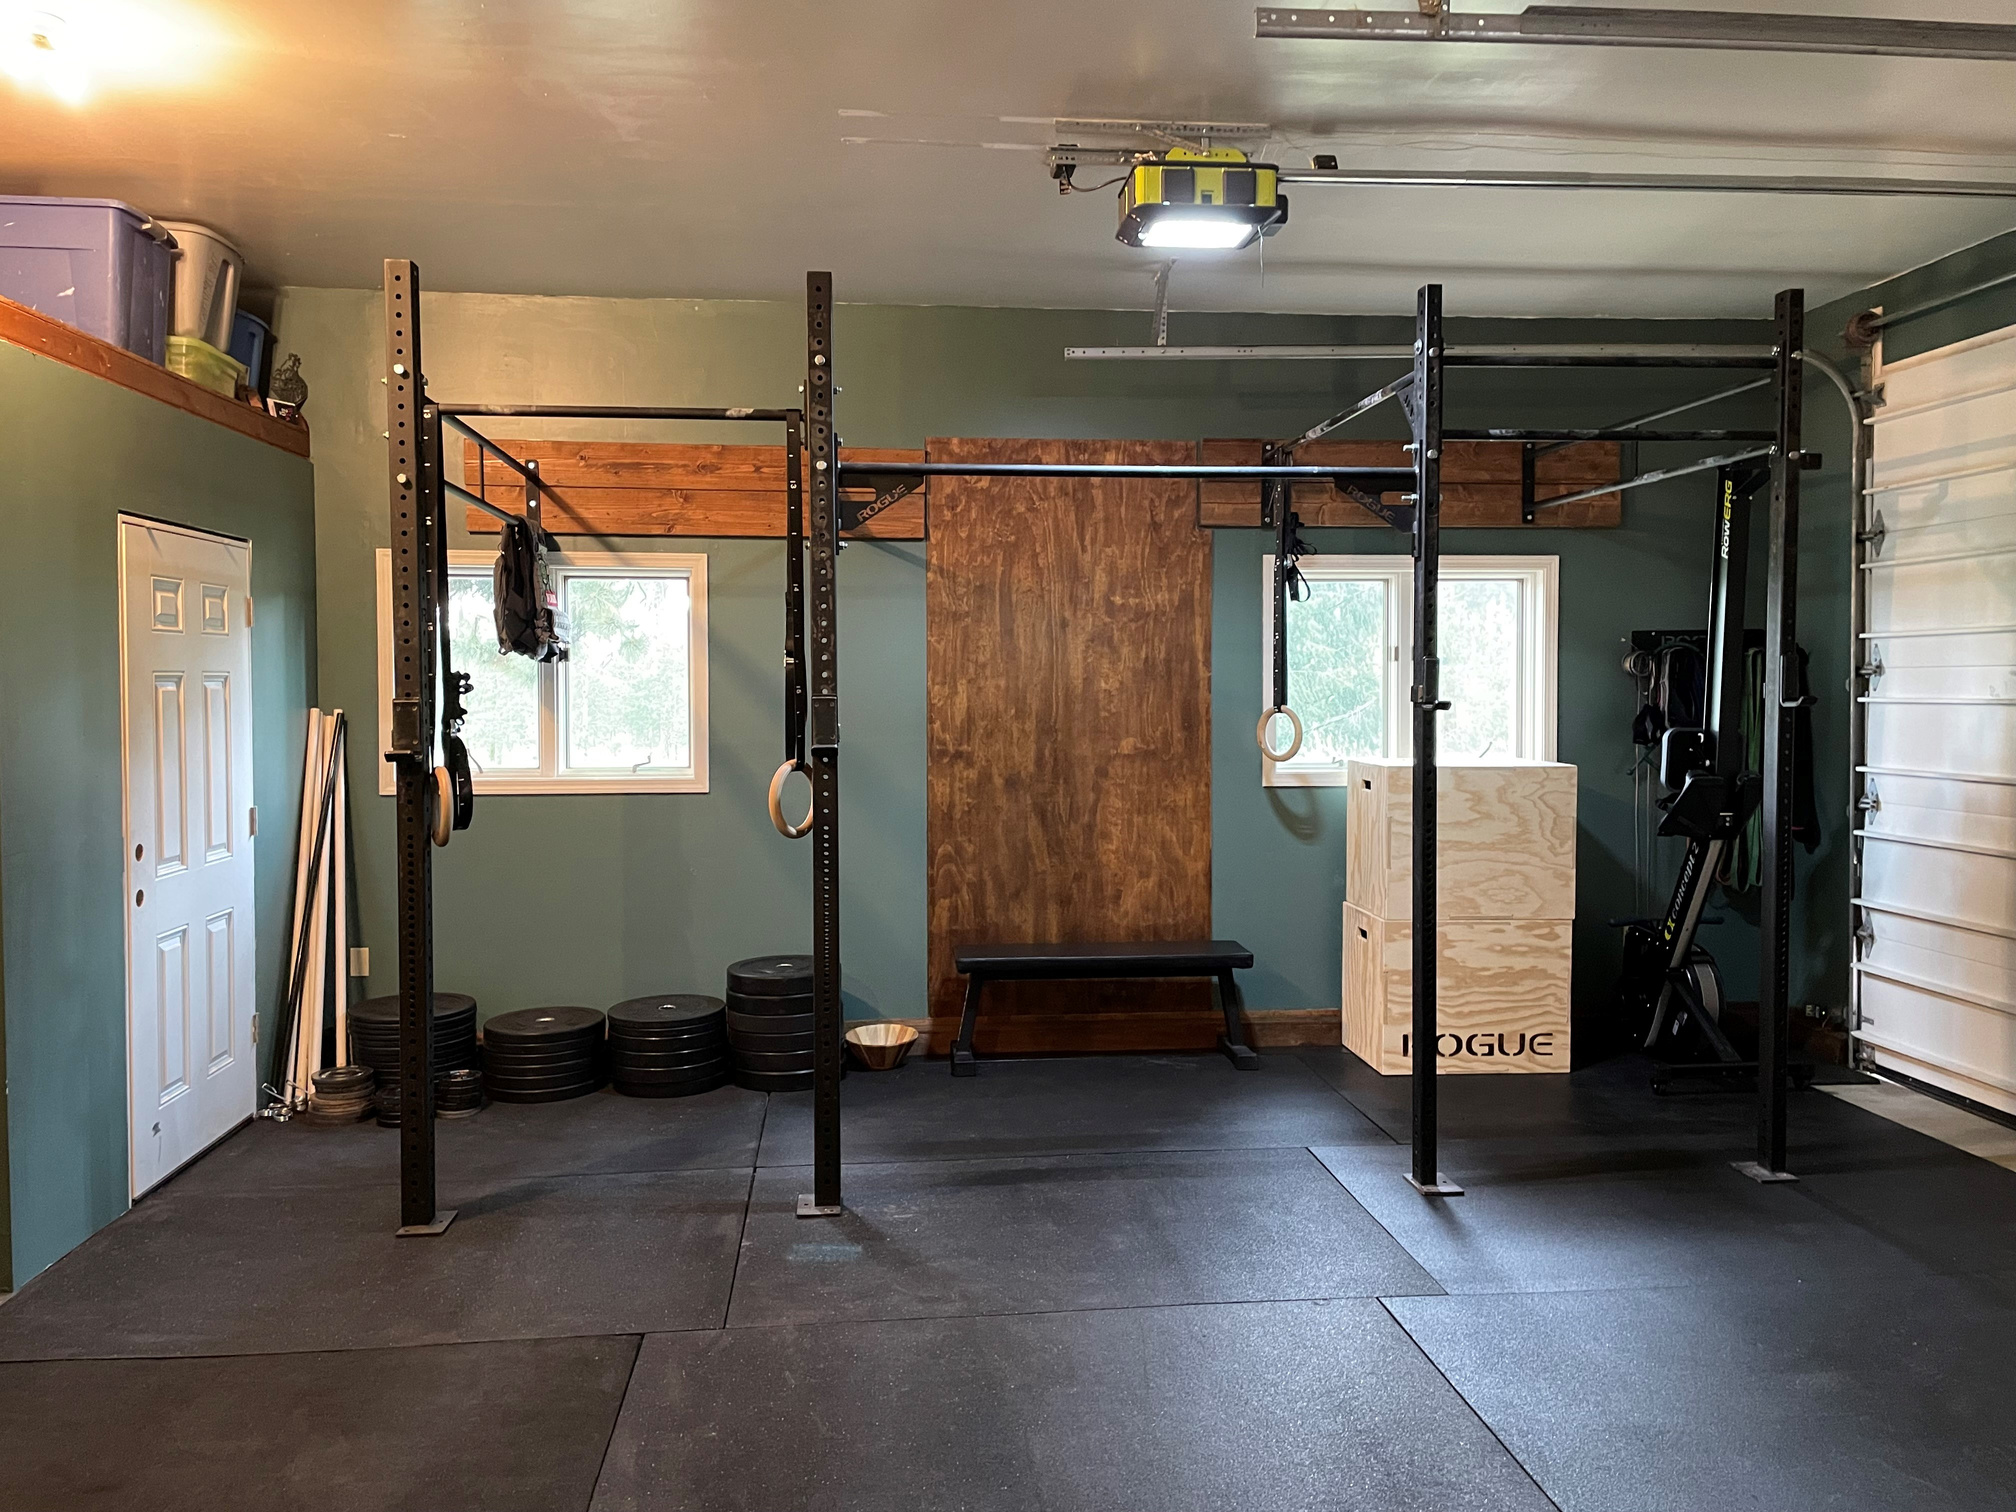 CrossFit Gym in McCall Idaho with Rogue equipment, rings, barbells, weights, rig, plyo boxes